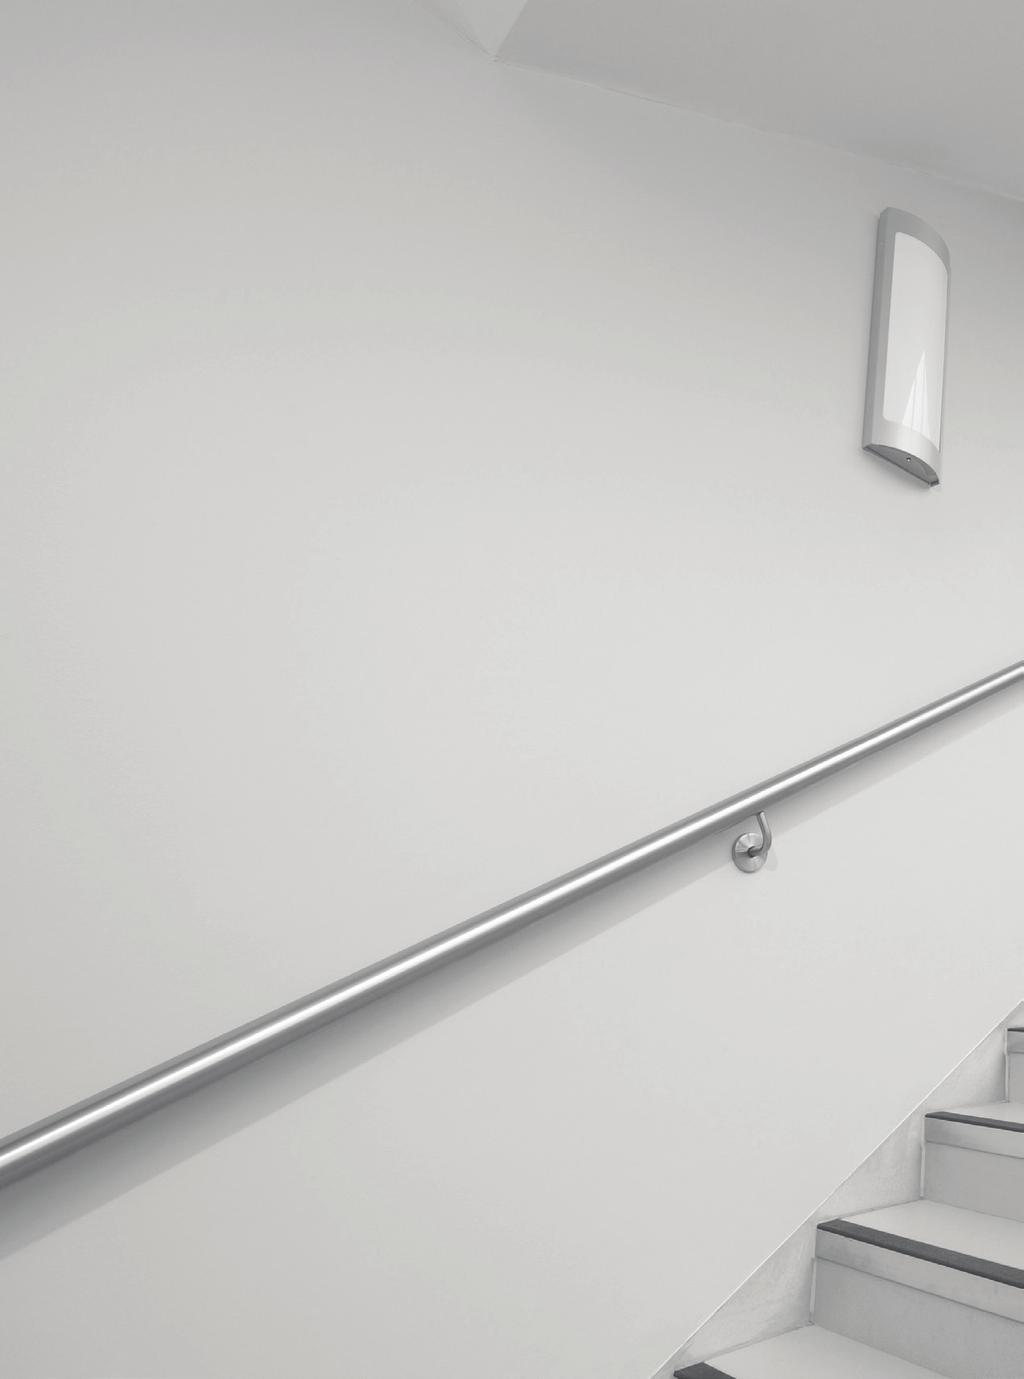 HANDRAIL FINISHES OPTION 01 SIGMA Sigma satin polished 304 grade stainless steel is designed specifically to withstand decades of very heavy usage in the most demanding of